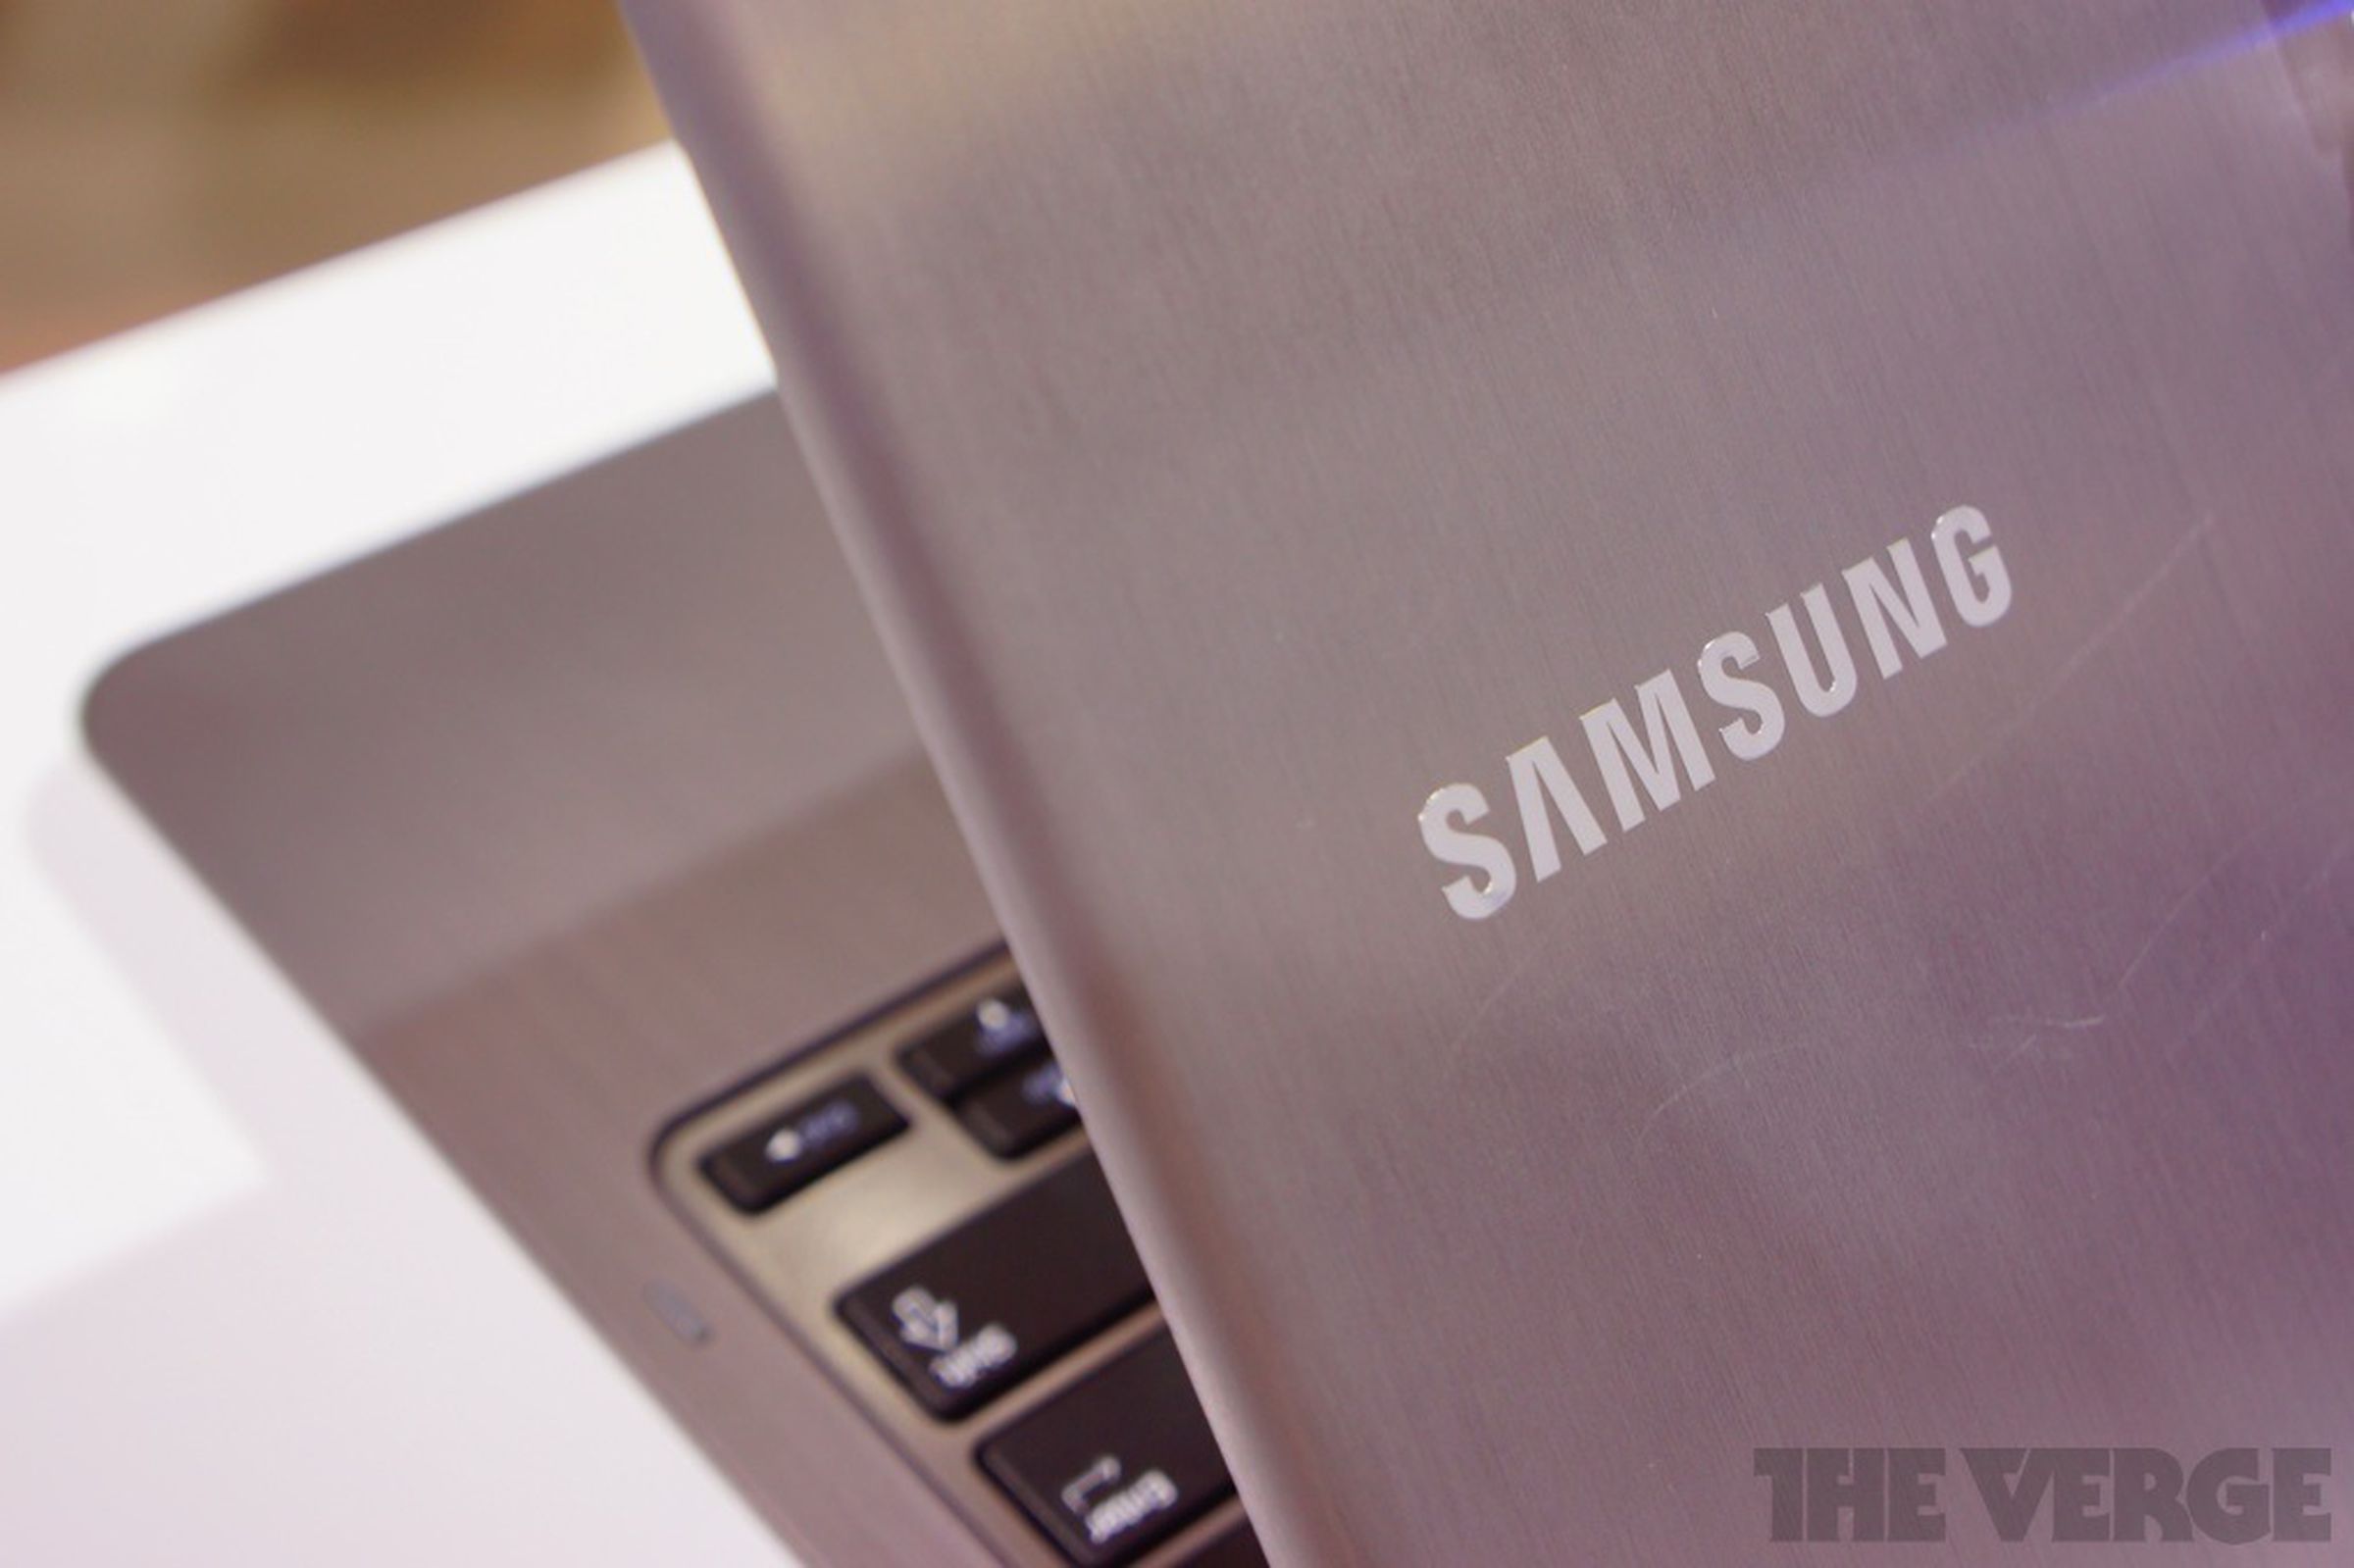 Samsung Series 5 Ultra Touch hands-on photos